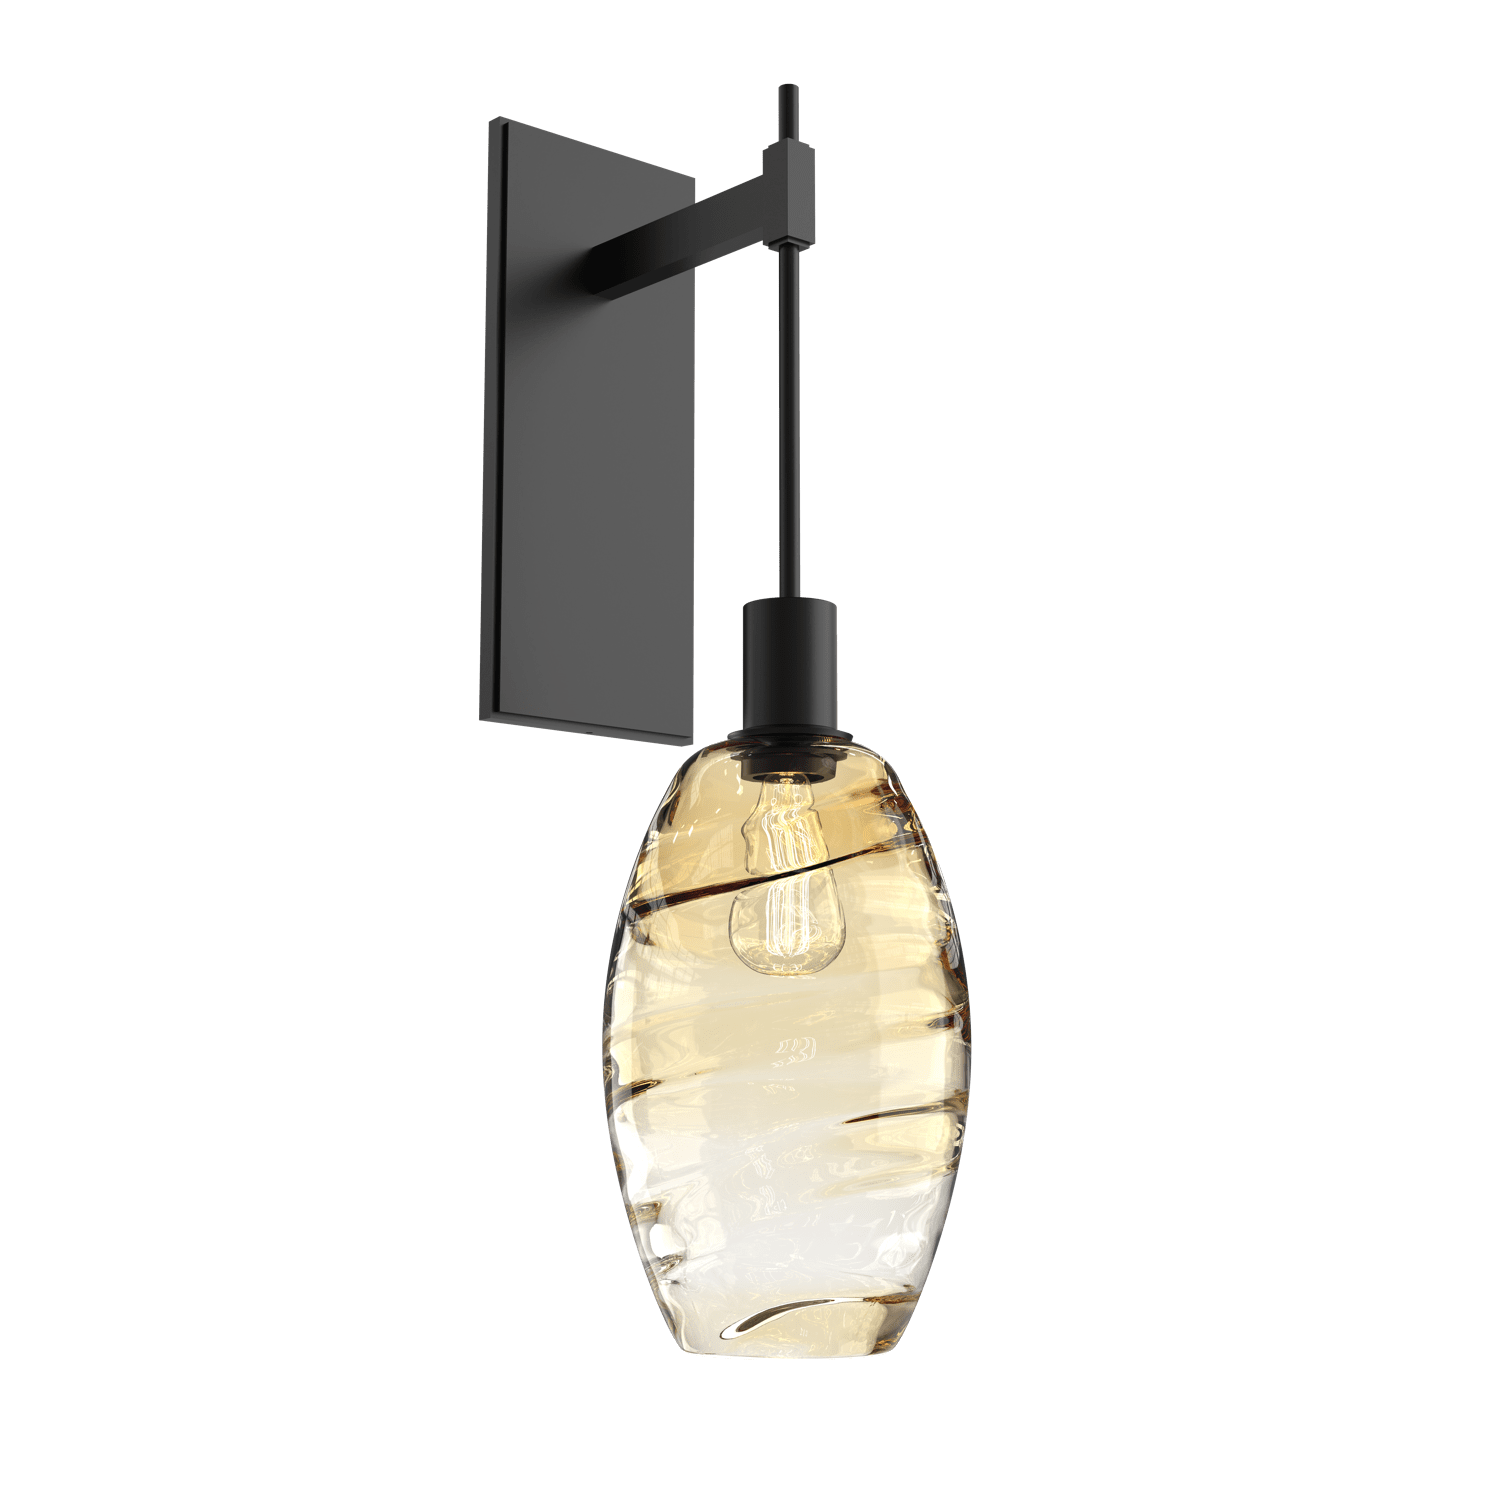 IDB0035-24-MB-OA-Hammerton-Studio-Optic-Blown-Glass-Elisse-tempo-wall-sconce-with-matte-black-finish-and-optic-amber-blown-glass-shades-and-incandescent-lamping